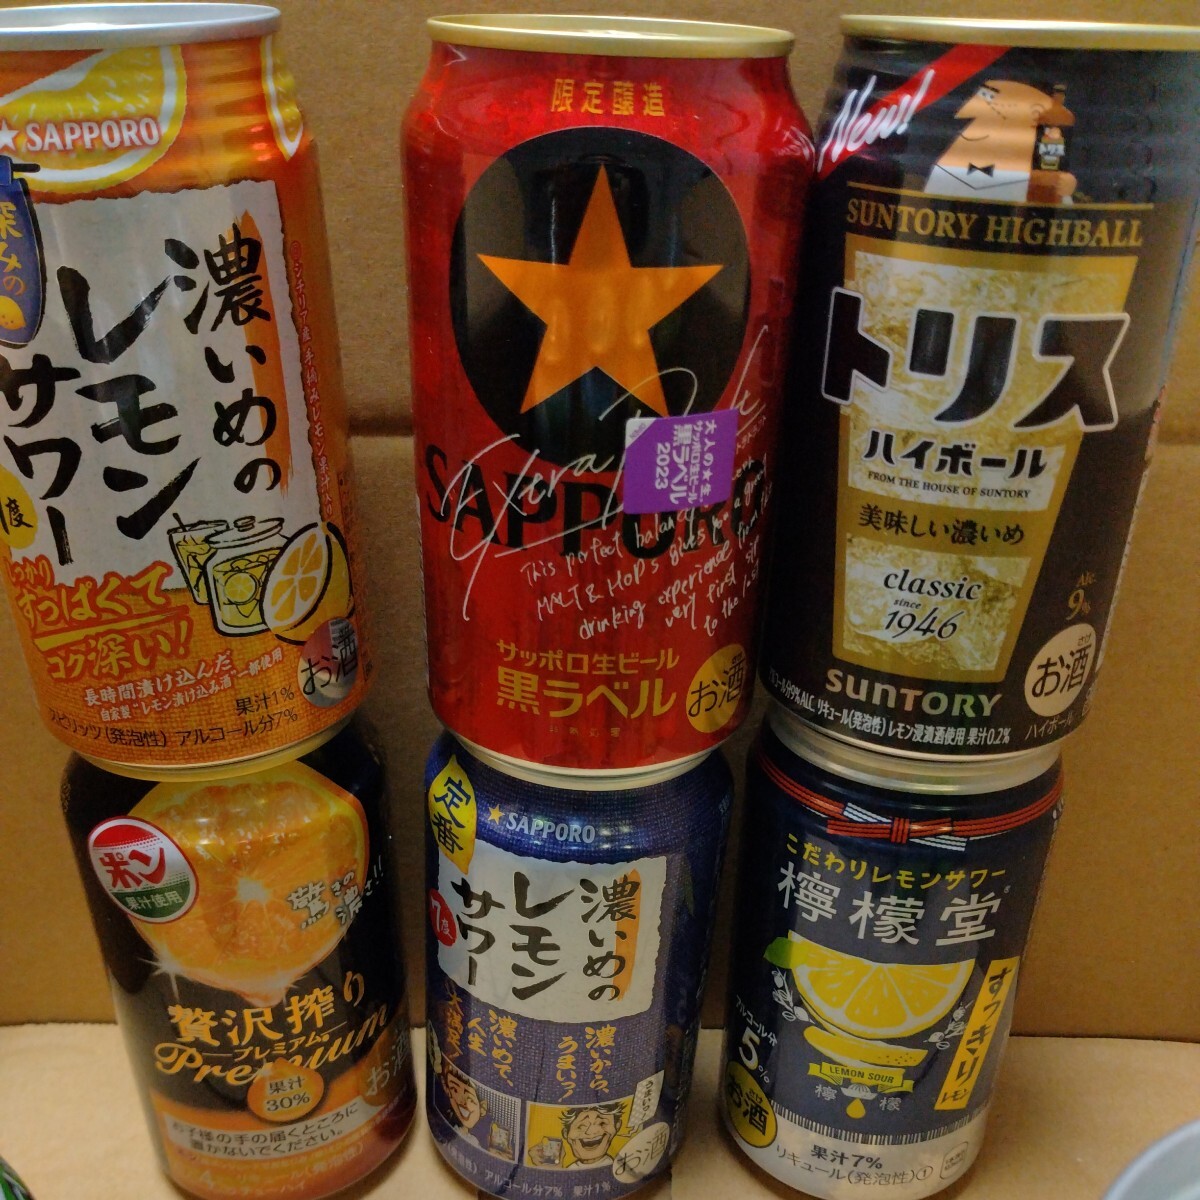  sake various 16ps.@ freebie attaching can beer highball high sour chuhai non aru time limit this month .4 pieces equipped to squirrel Suntory giraffe Sapporo Asahi 